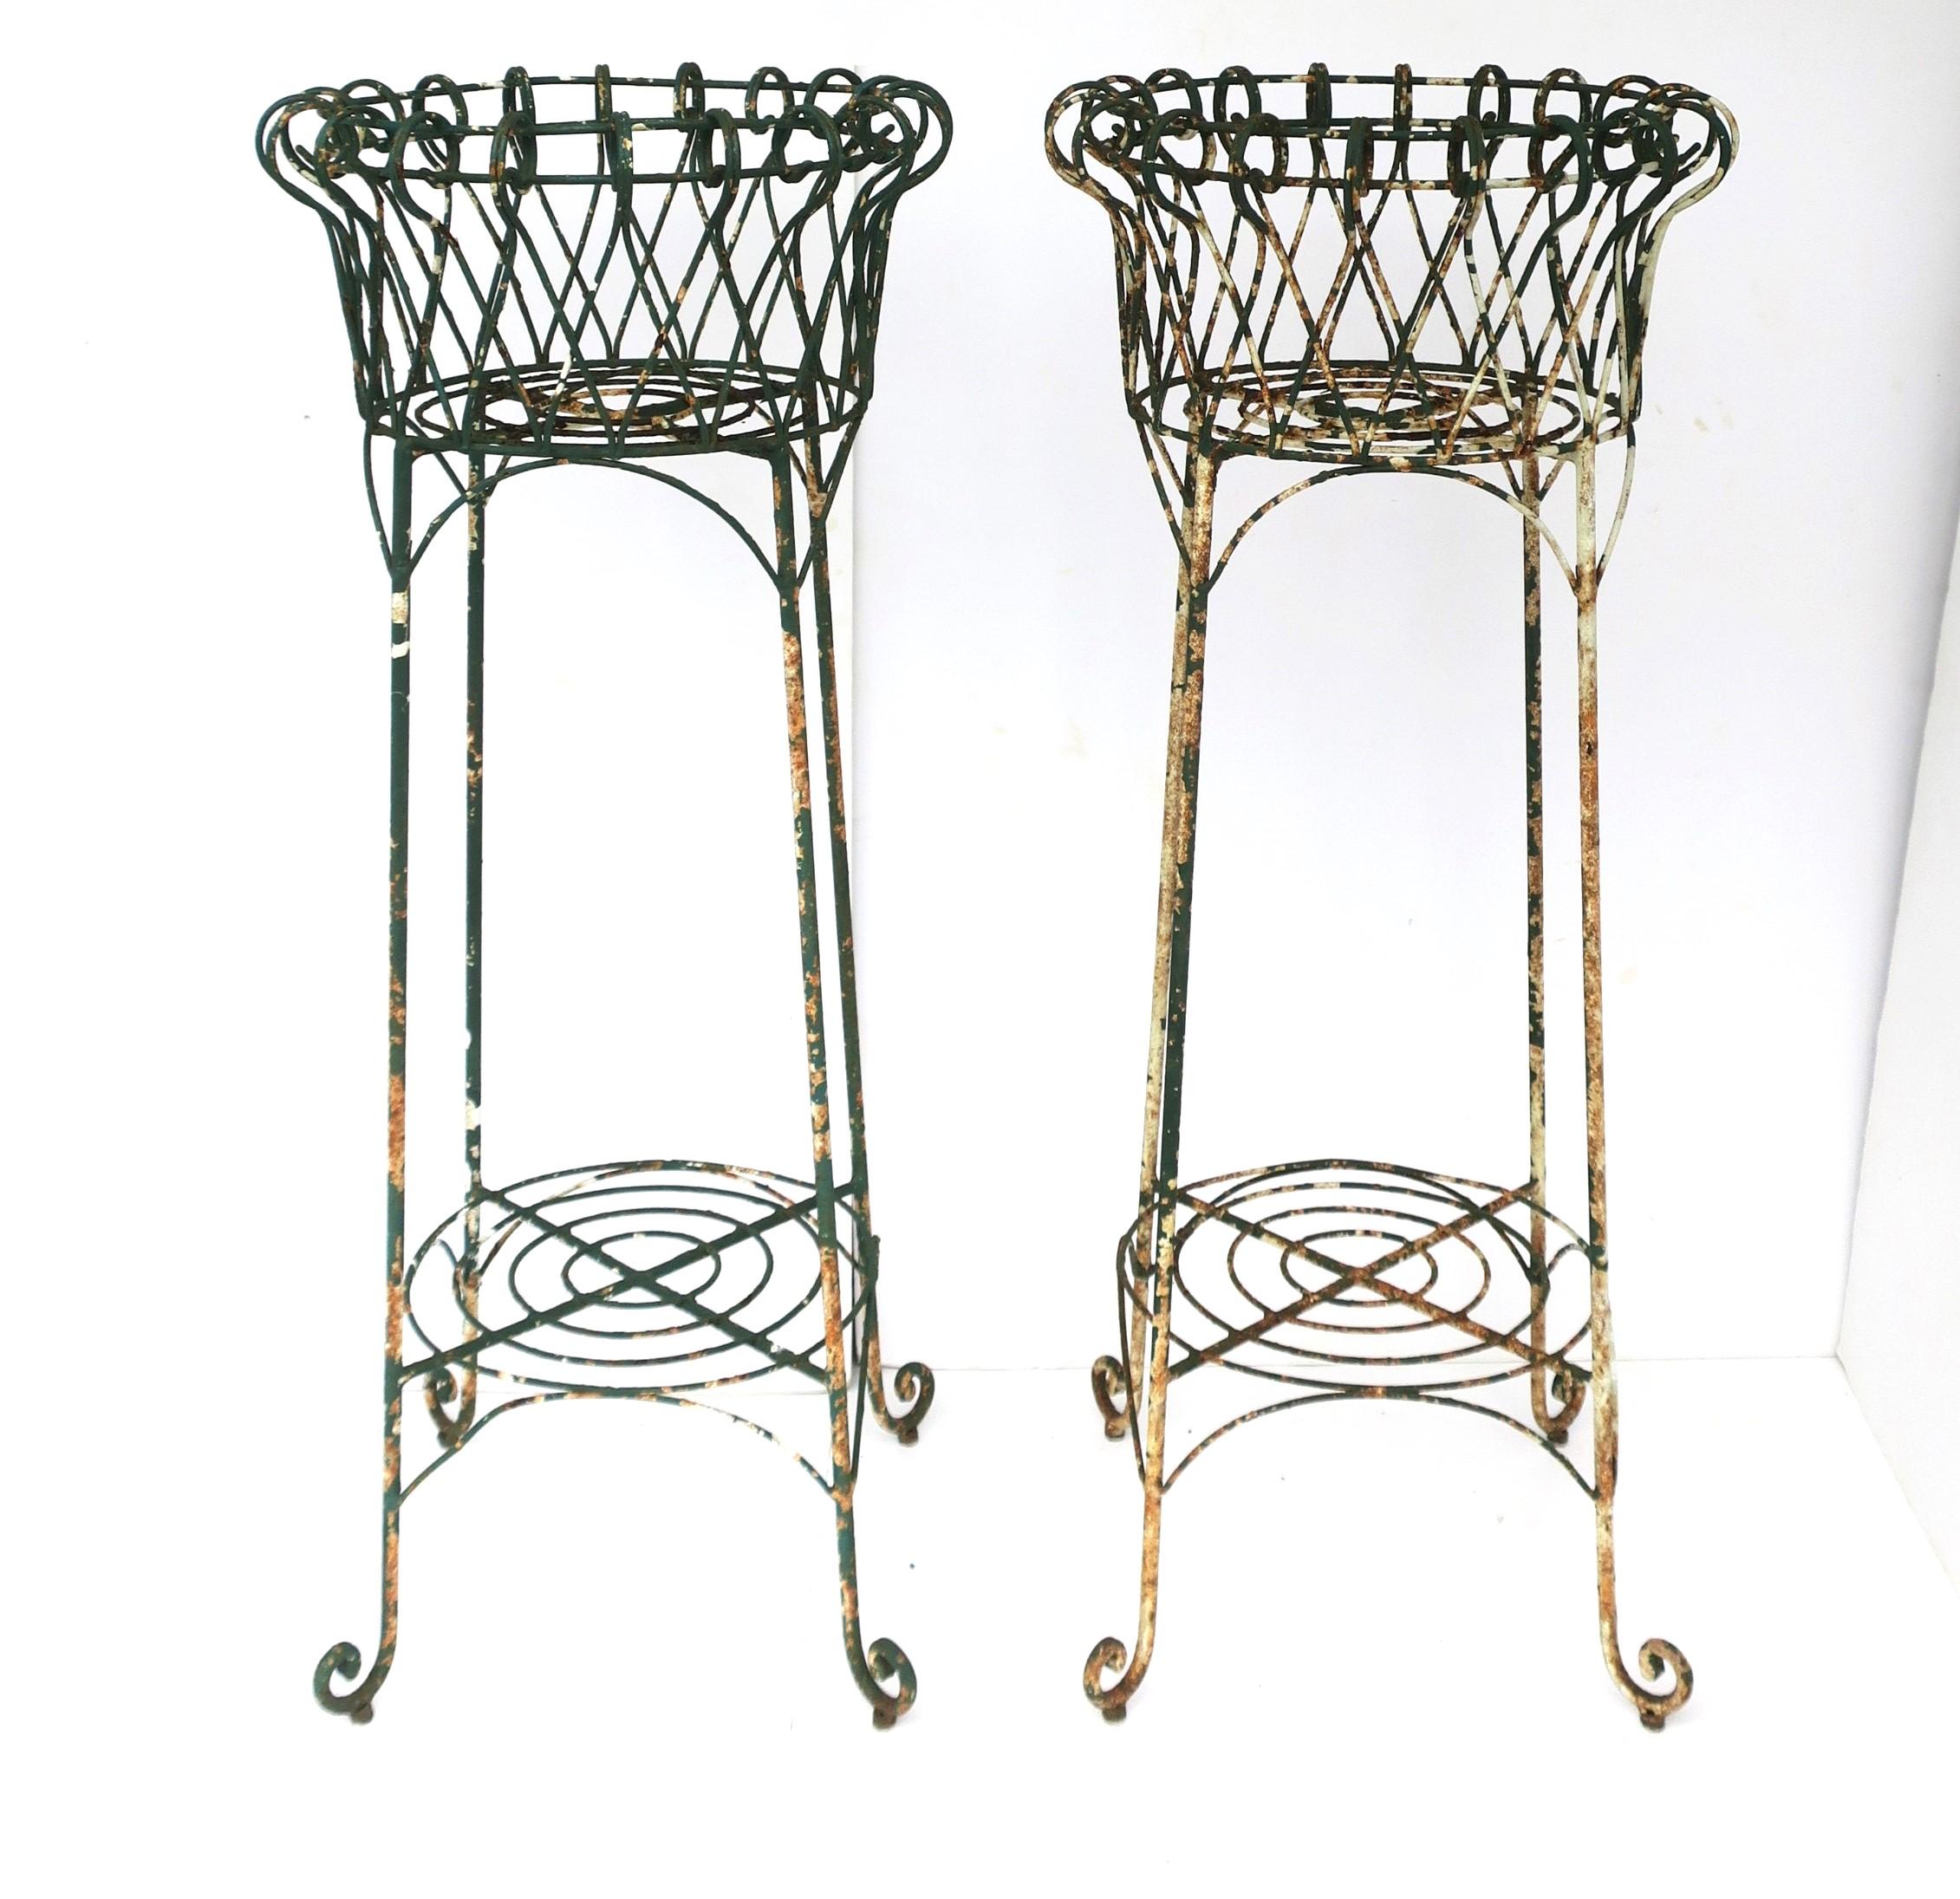 Painted French Iron Wire Plant Flowerpot Holder Stands Jardinieres, Pair